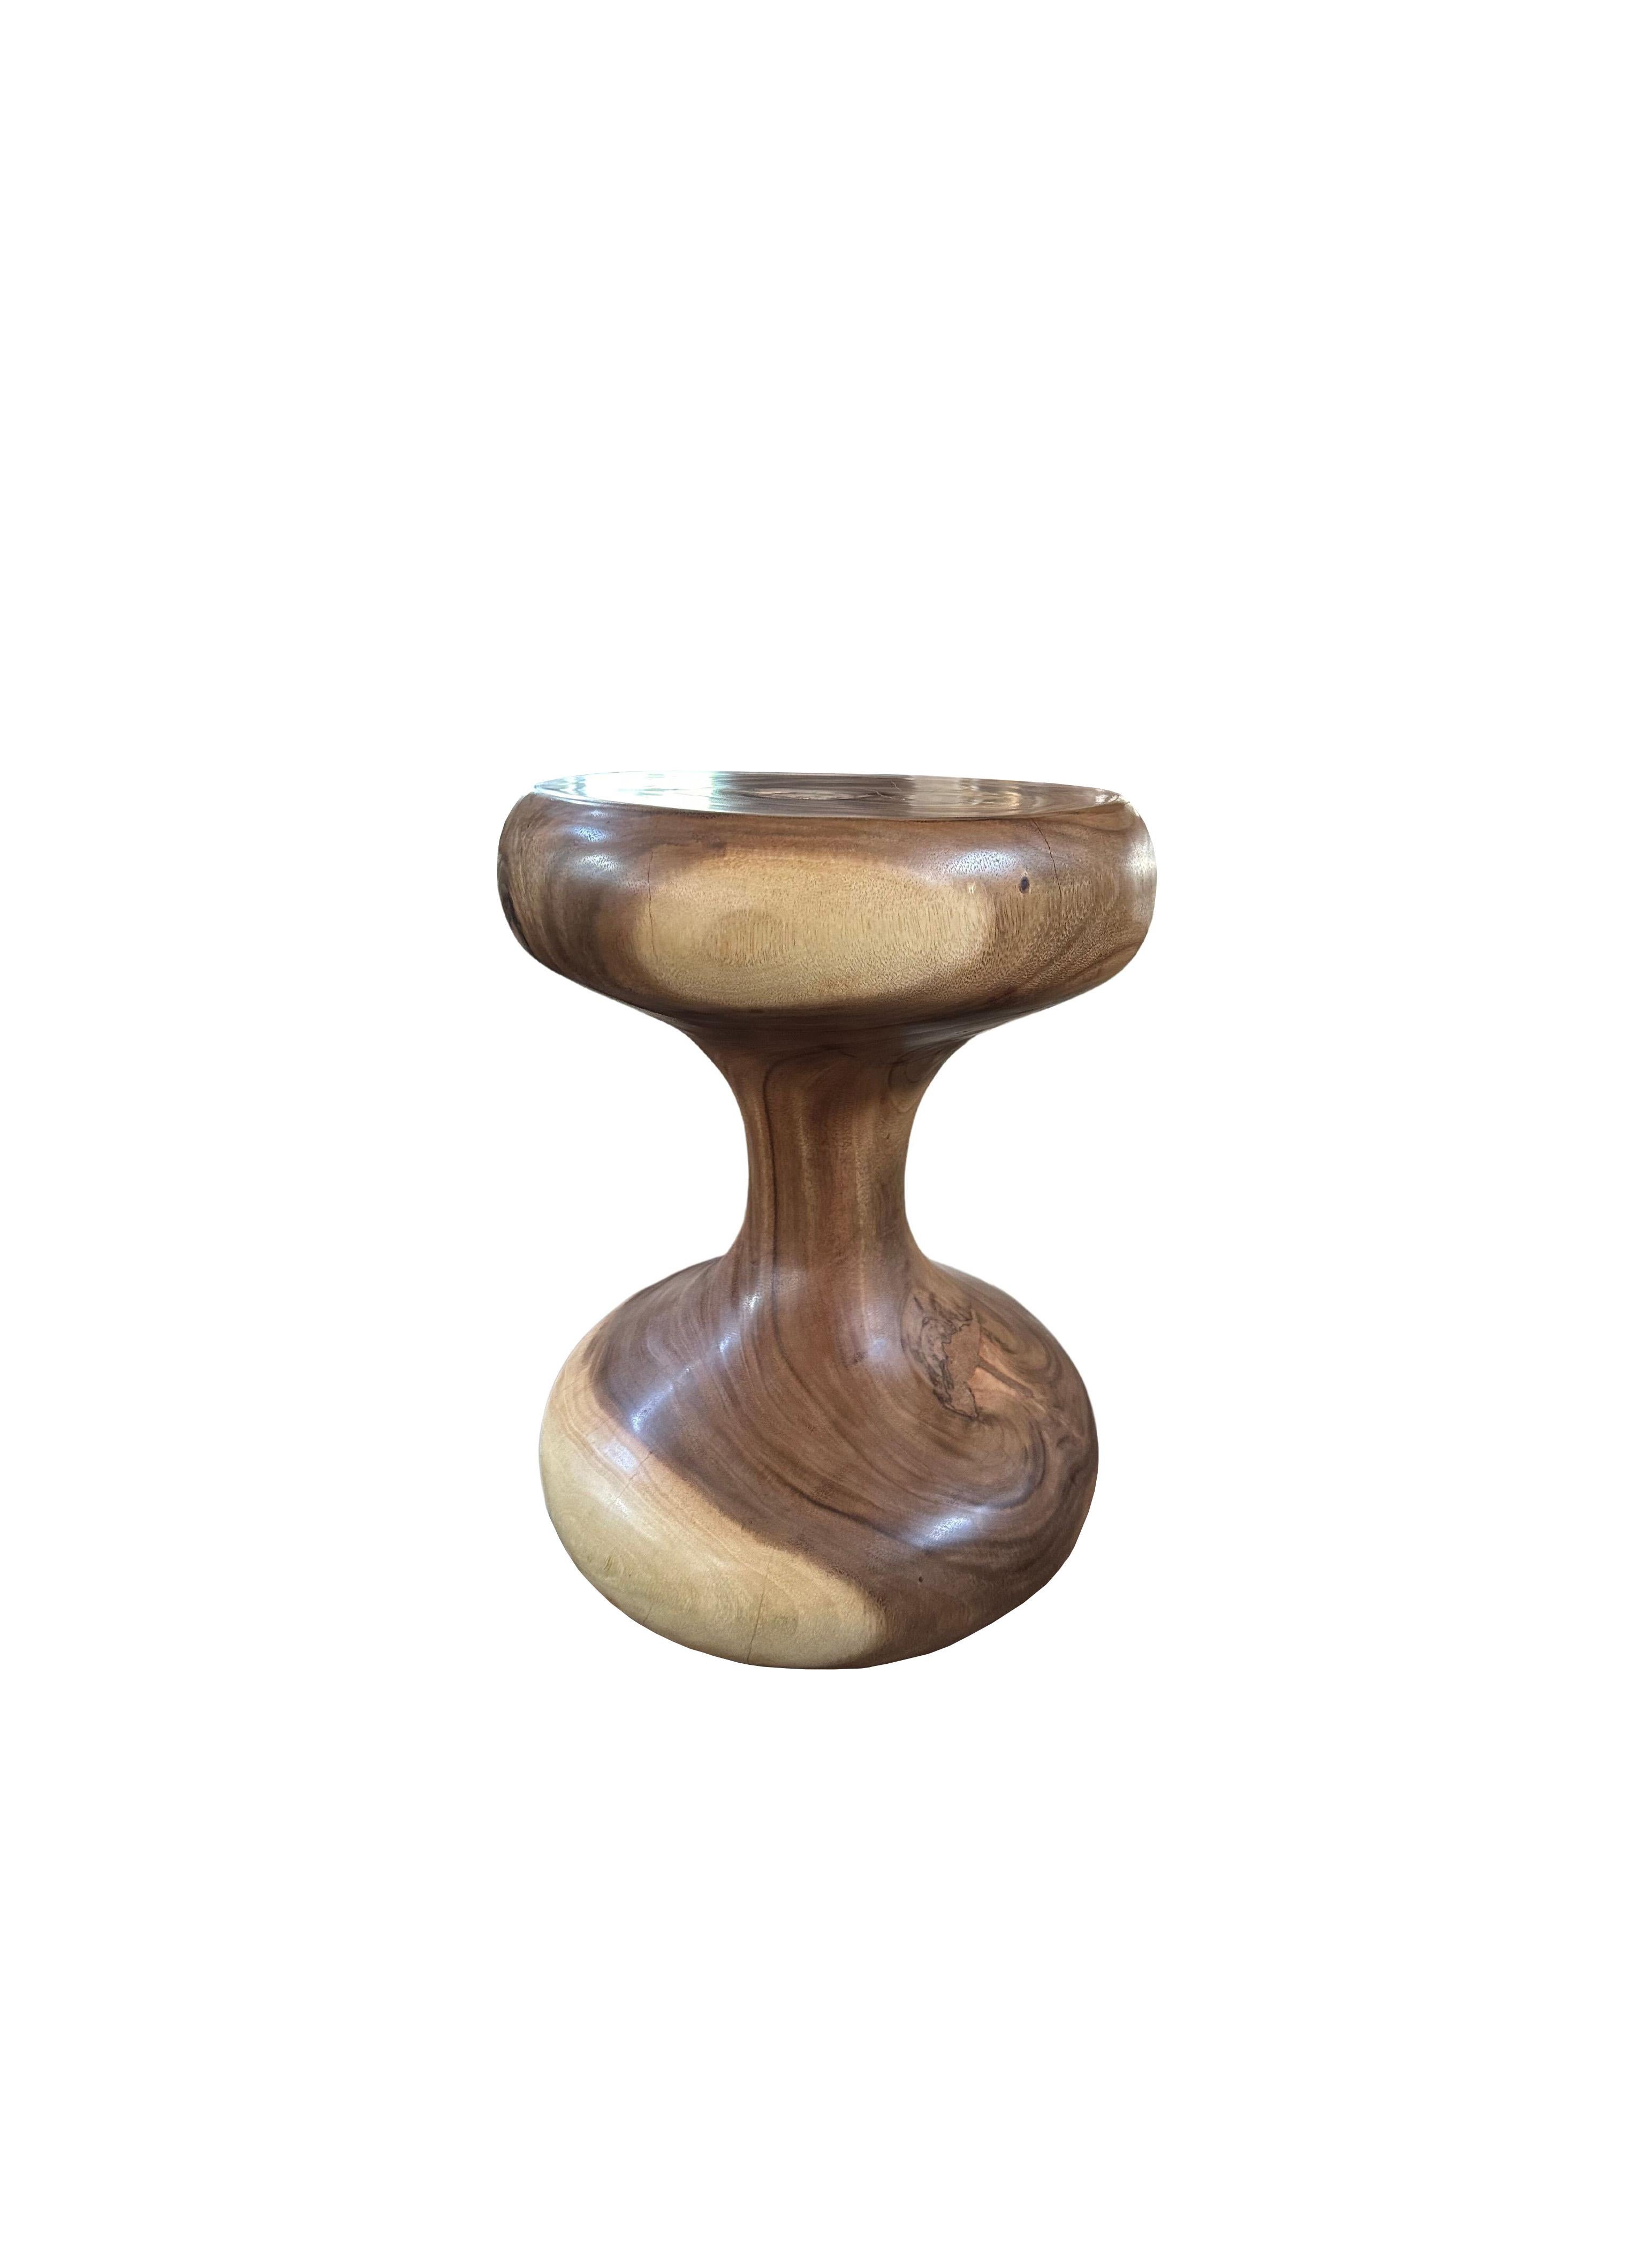 A wonderfully sculptural side table crafted from Suar Wood. Its curved edges and abstract form add to its charm. The perfect object to bring warmth to any space. 